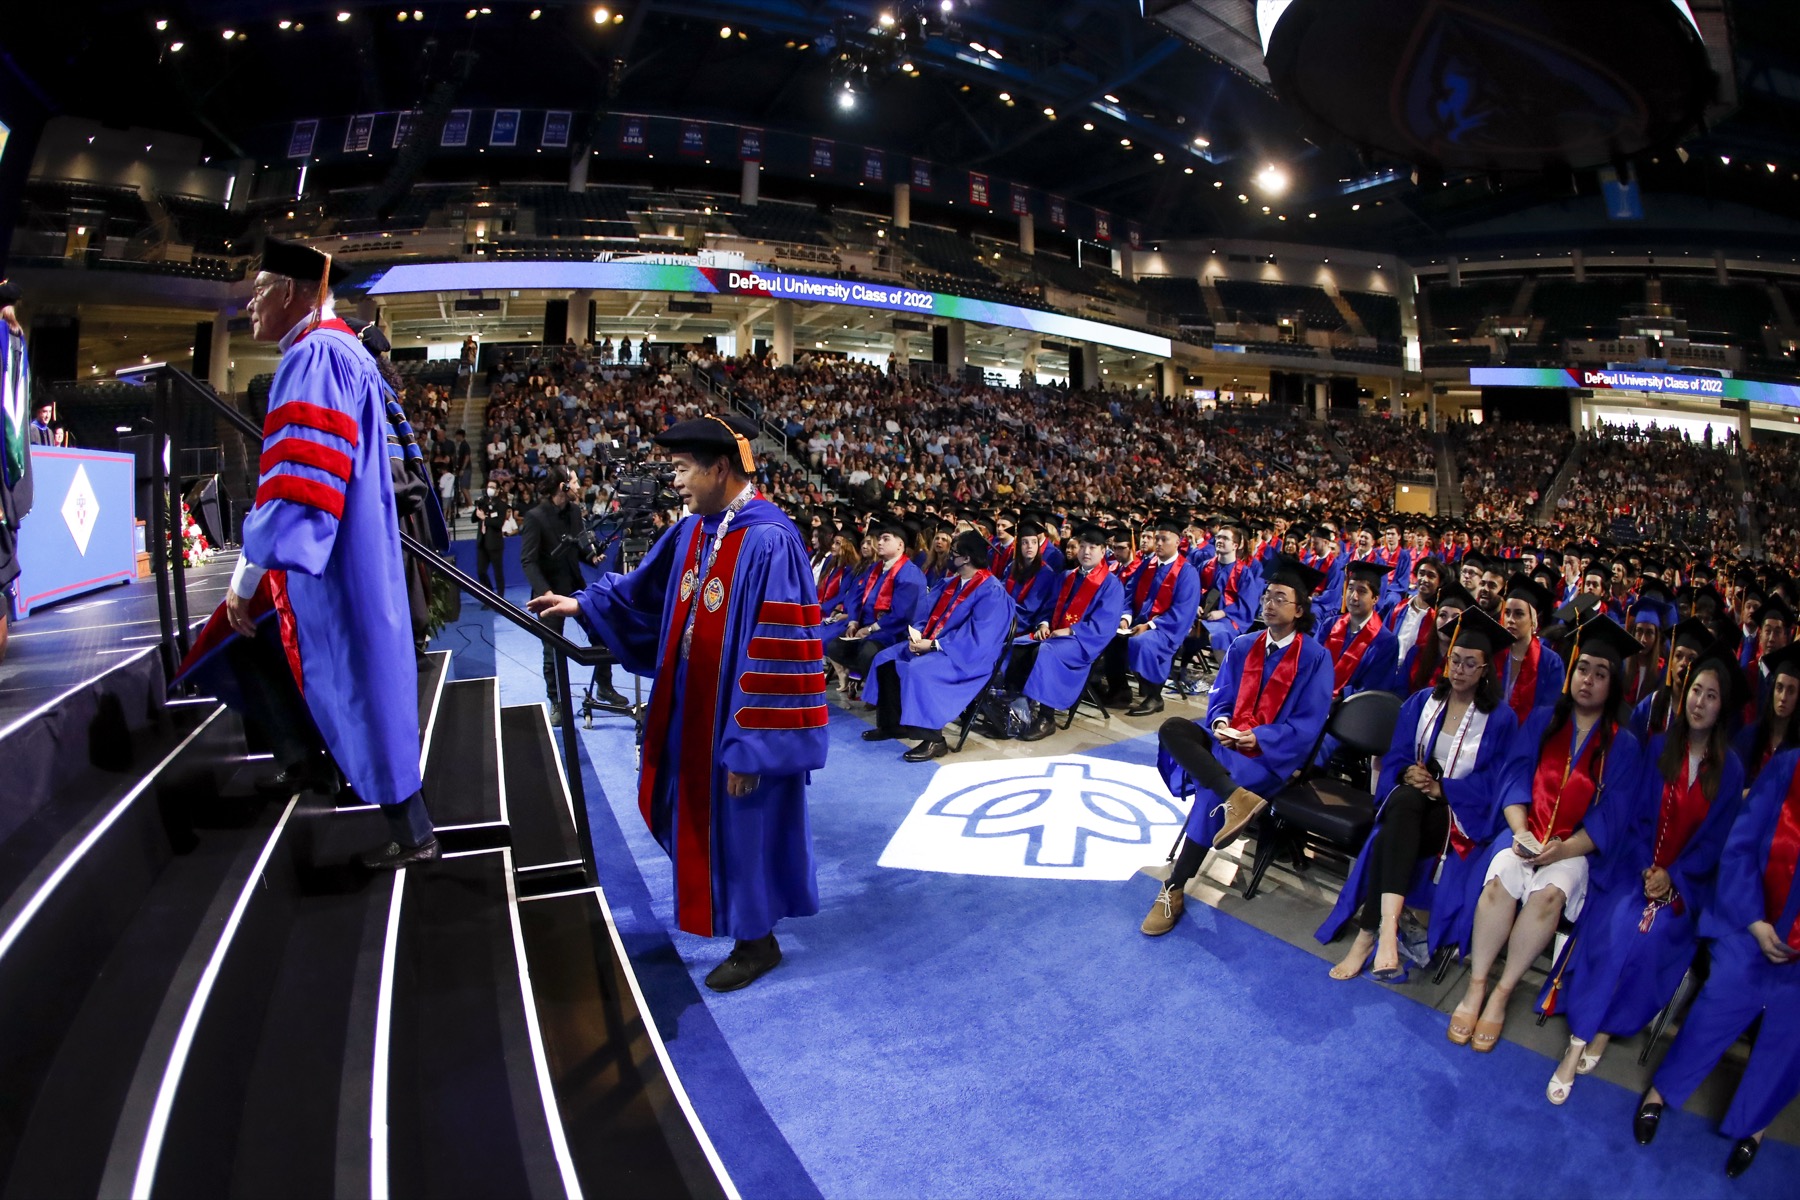 Dr. A. Gabriel Esteban walks up to the stage for one of his last commencement ceremonies as DePaul’s president.